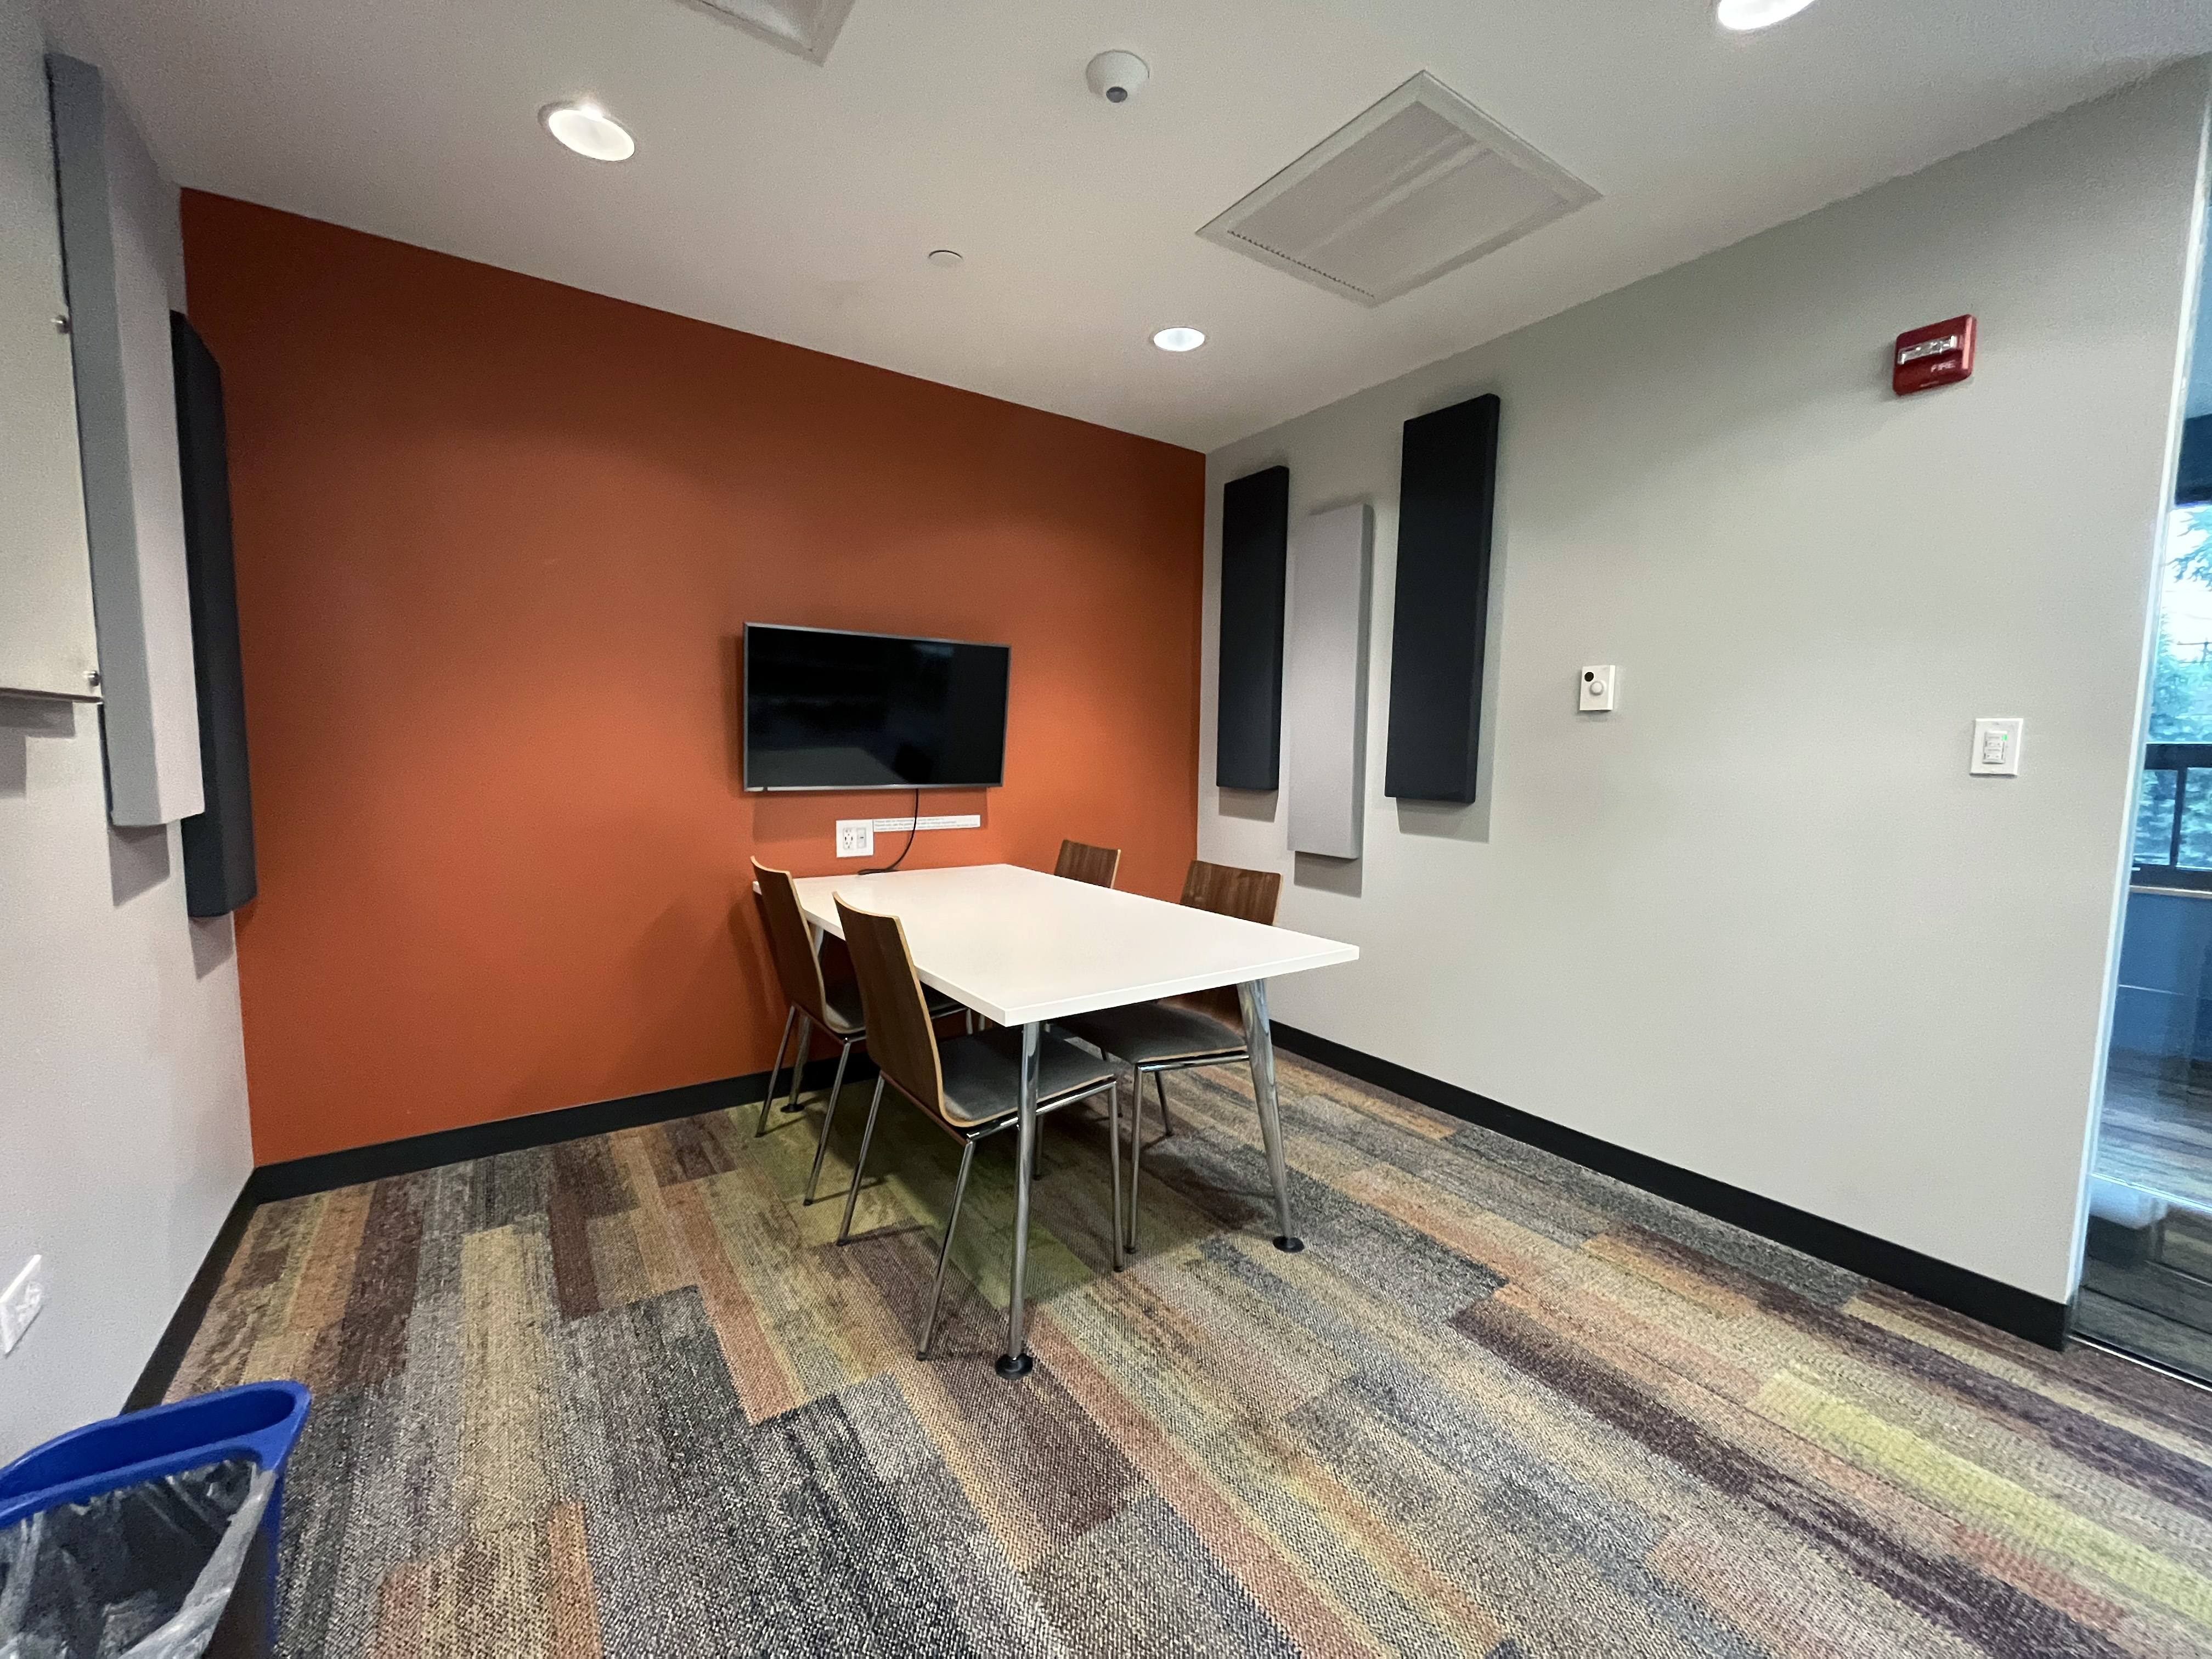 Study room with display monitor and tables and chairs